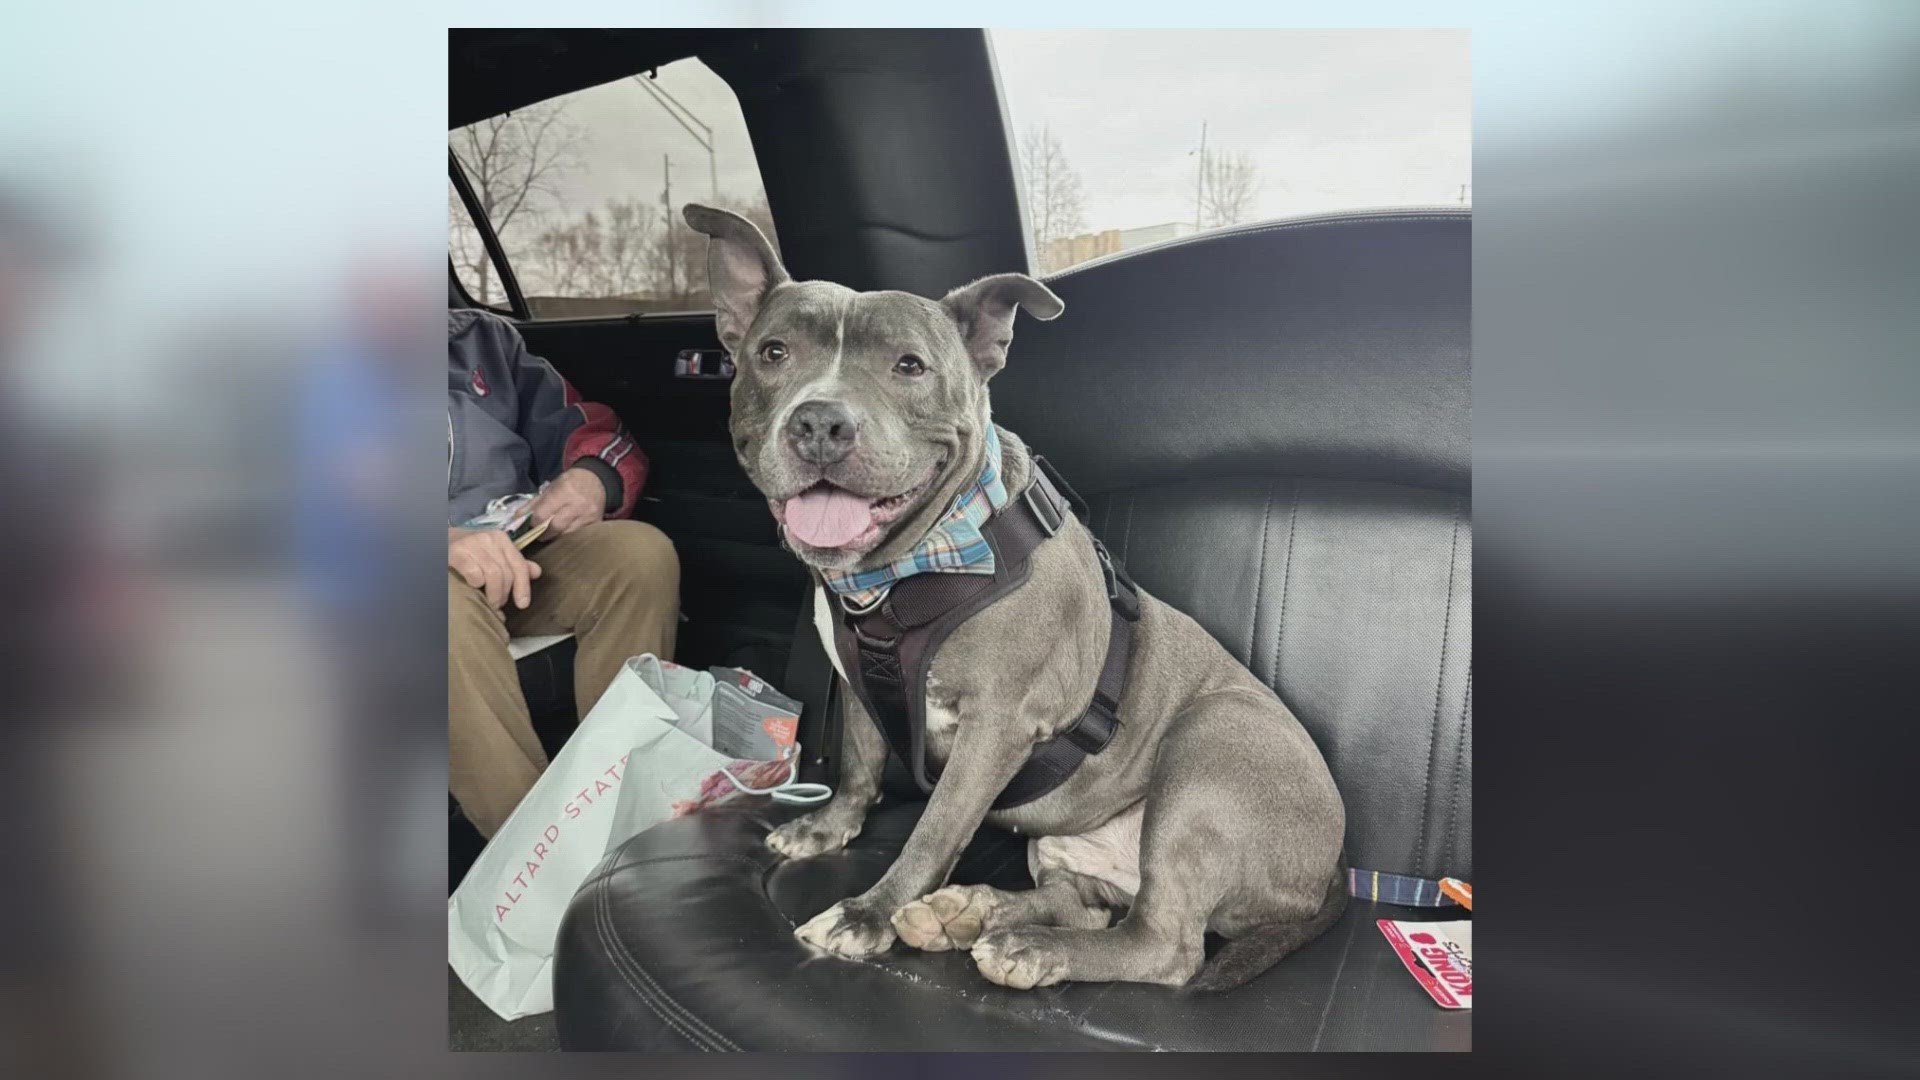 The newly adopted dog got a "clap out" from shelter staff and volunteers before traveling to his new home in a stretch limousine.